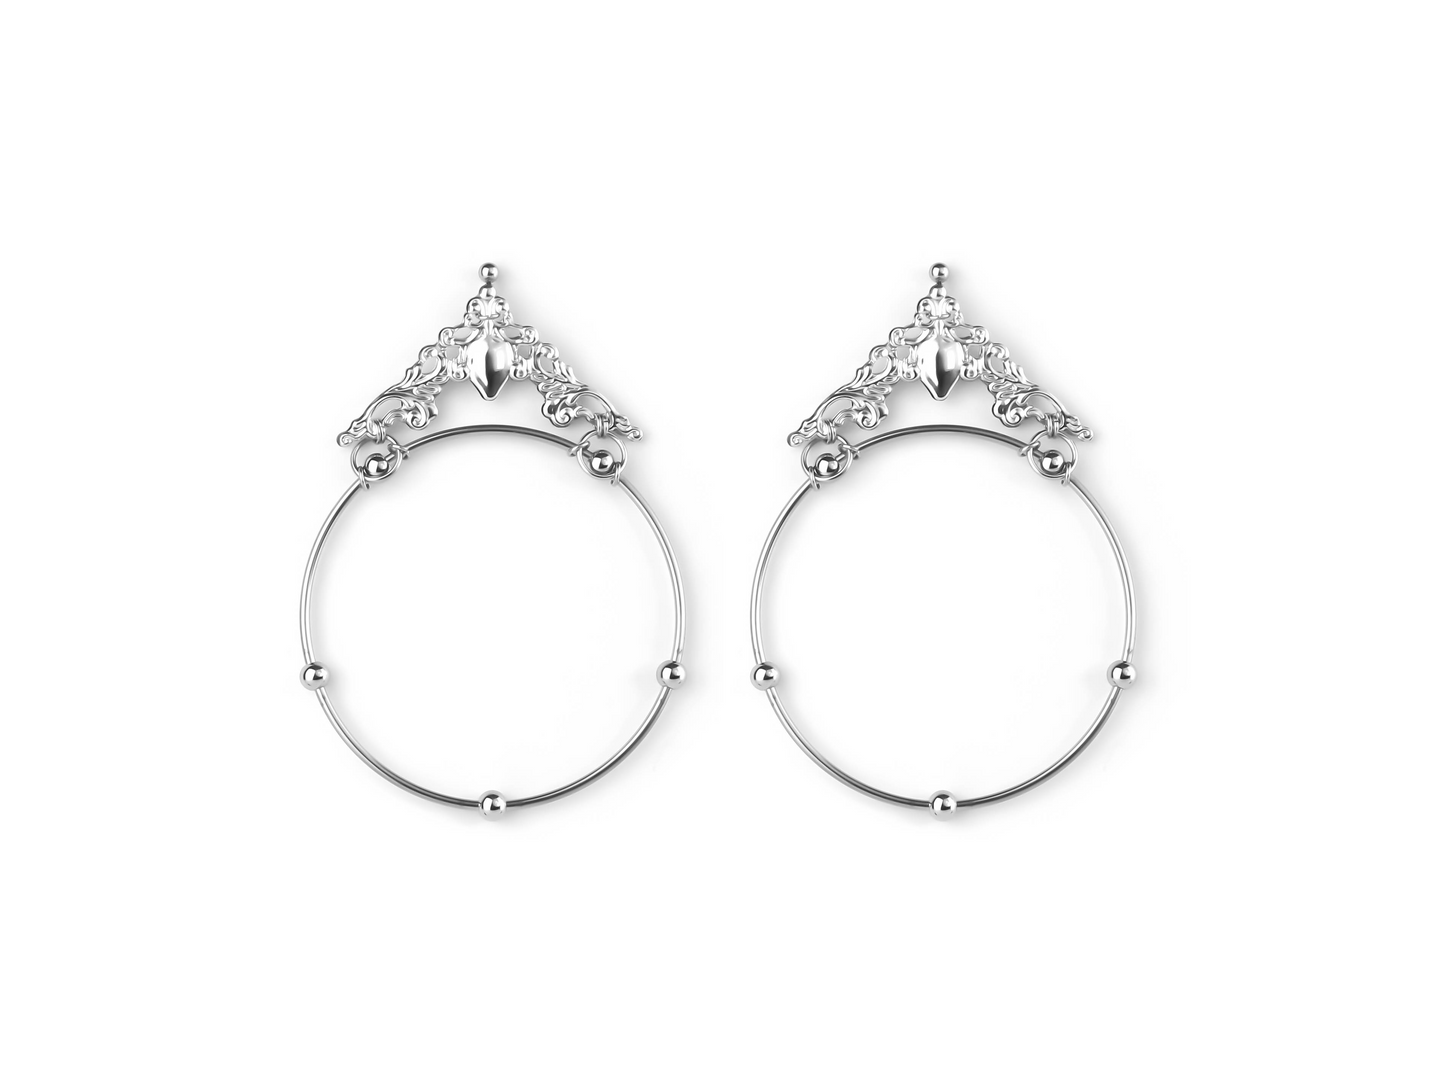 Bold and wide hoop earrings from Myril Jewels, featuring intricate gothic motifs, perfect for a statement piece in neo-gothic fashion. Ideal as a goth girlfriend gift or a unique addition to a dark-avantgarde jewelry collection